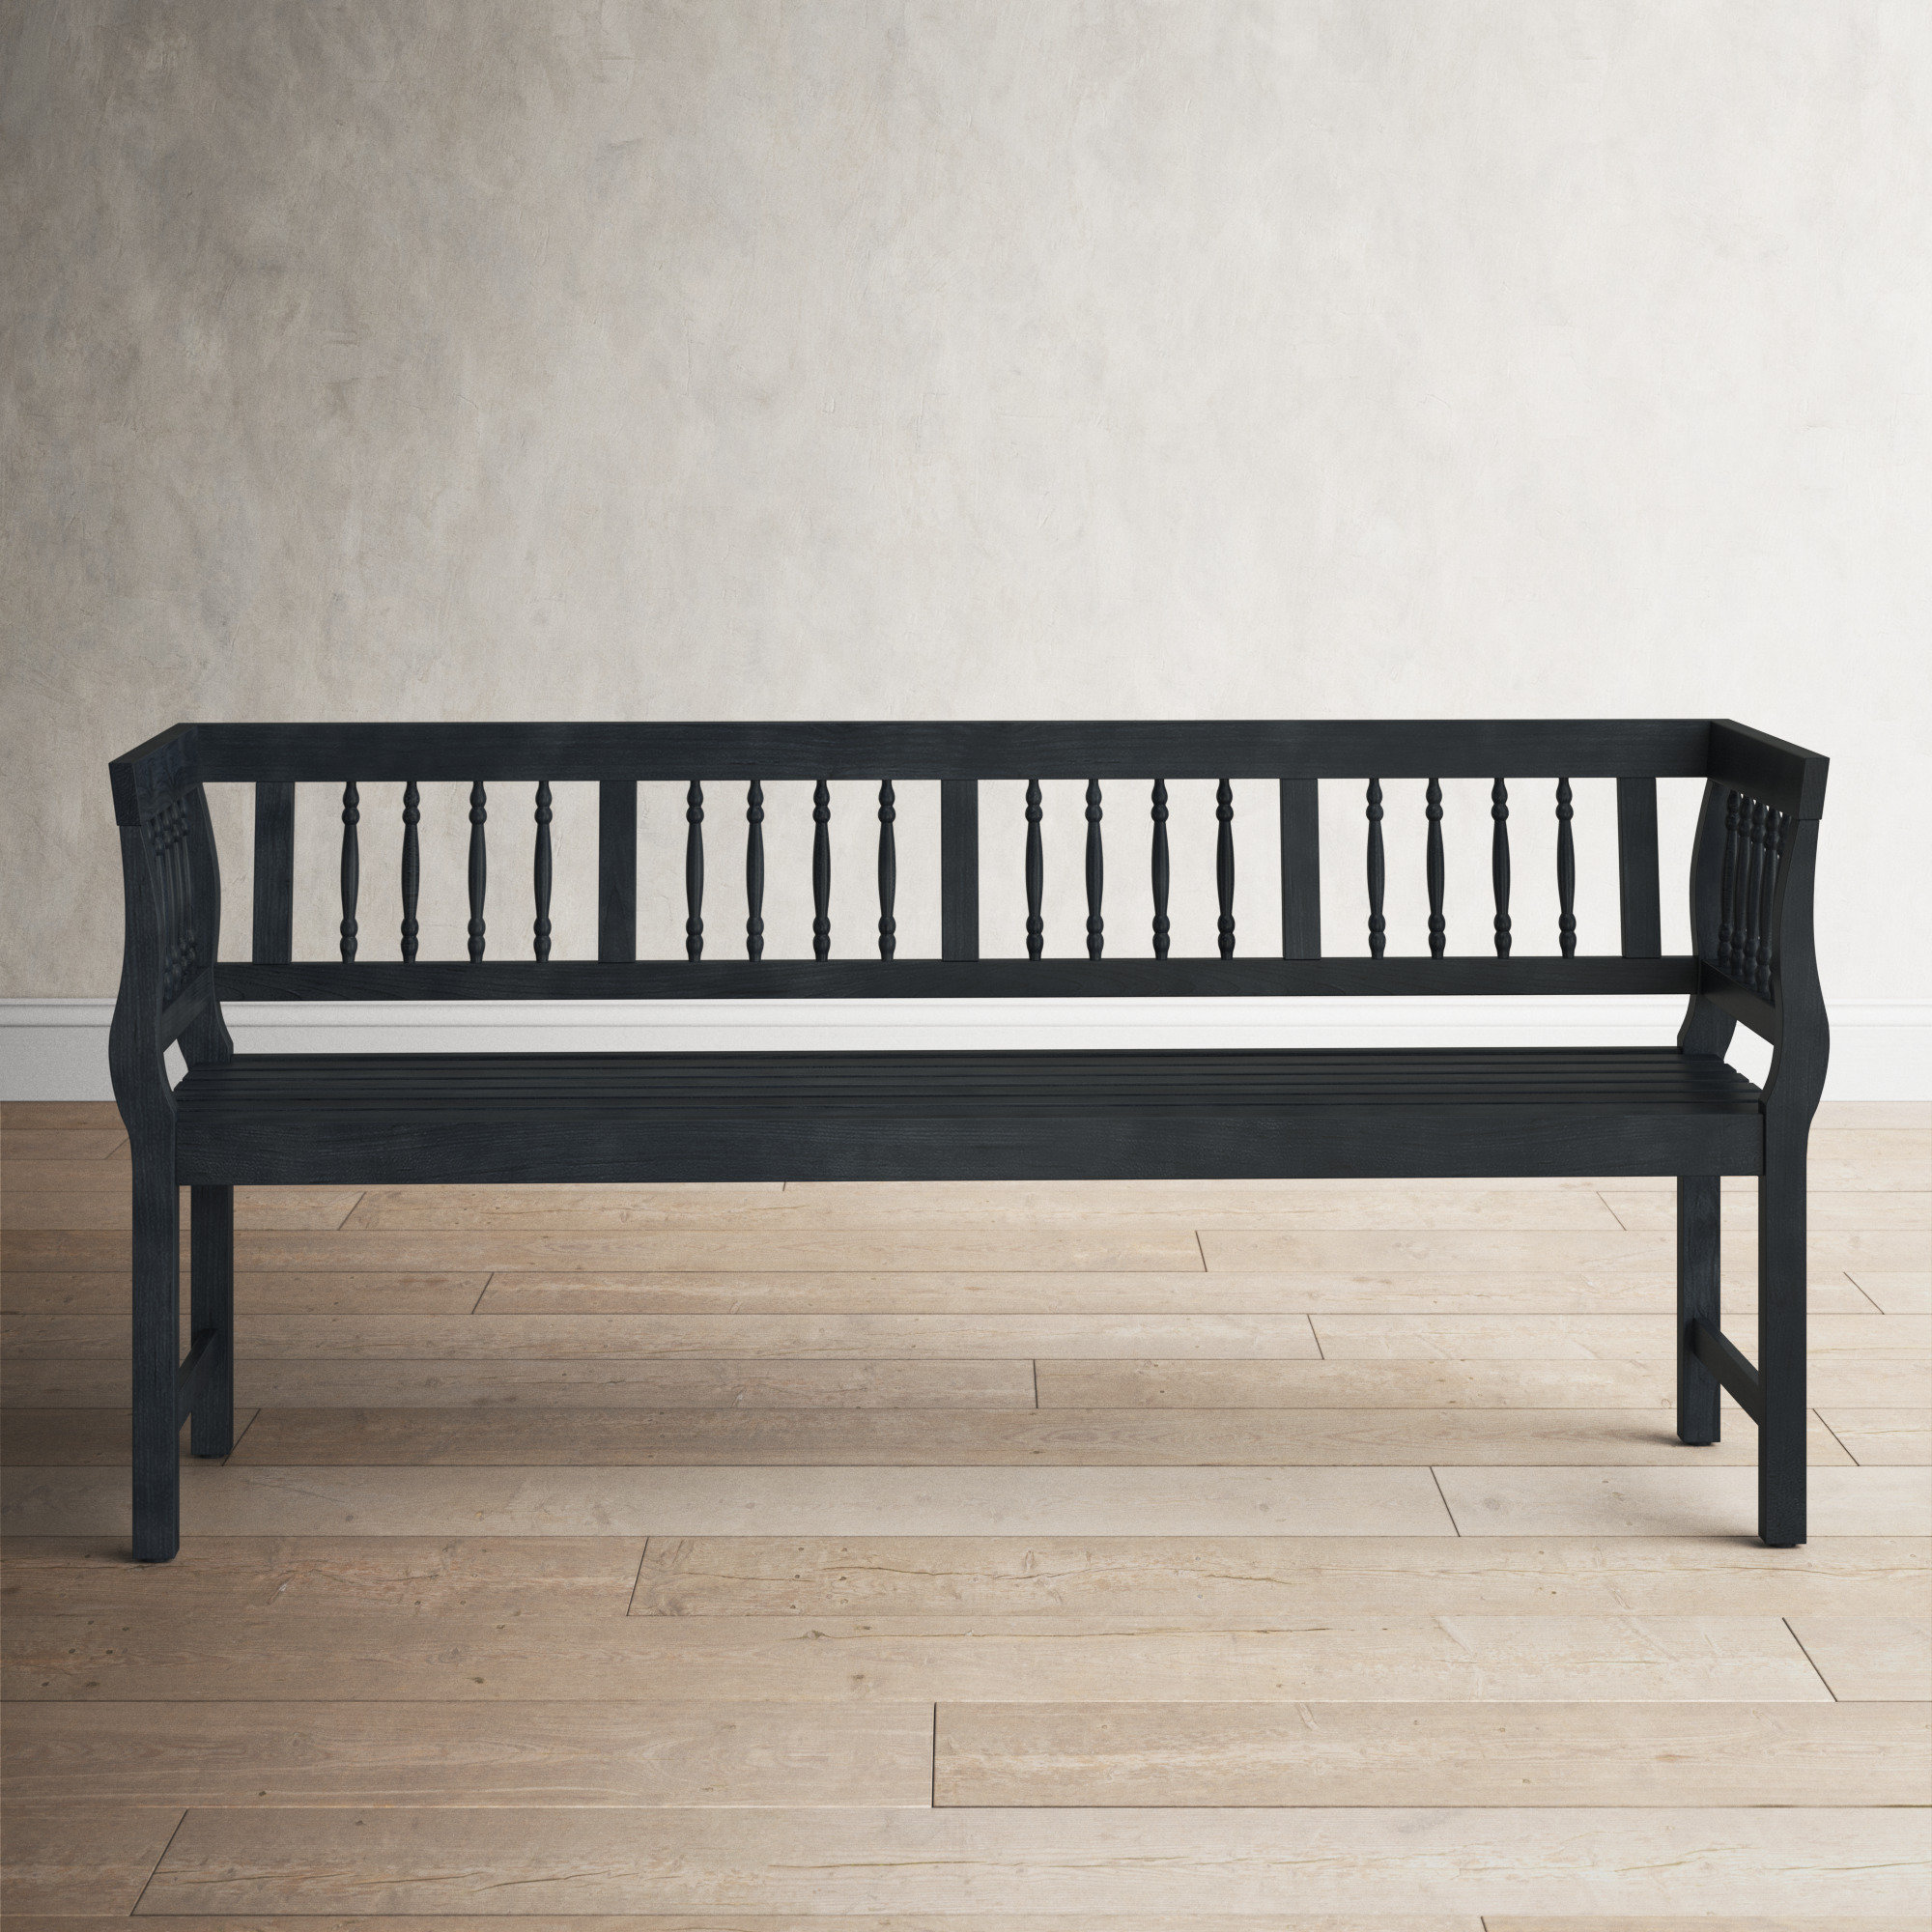 Wayfair | Entryway Light Wood Benches You'll Love in 2023